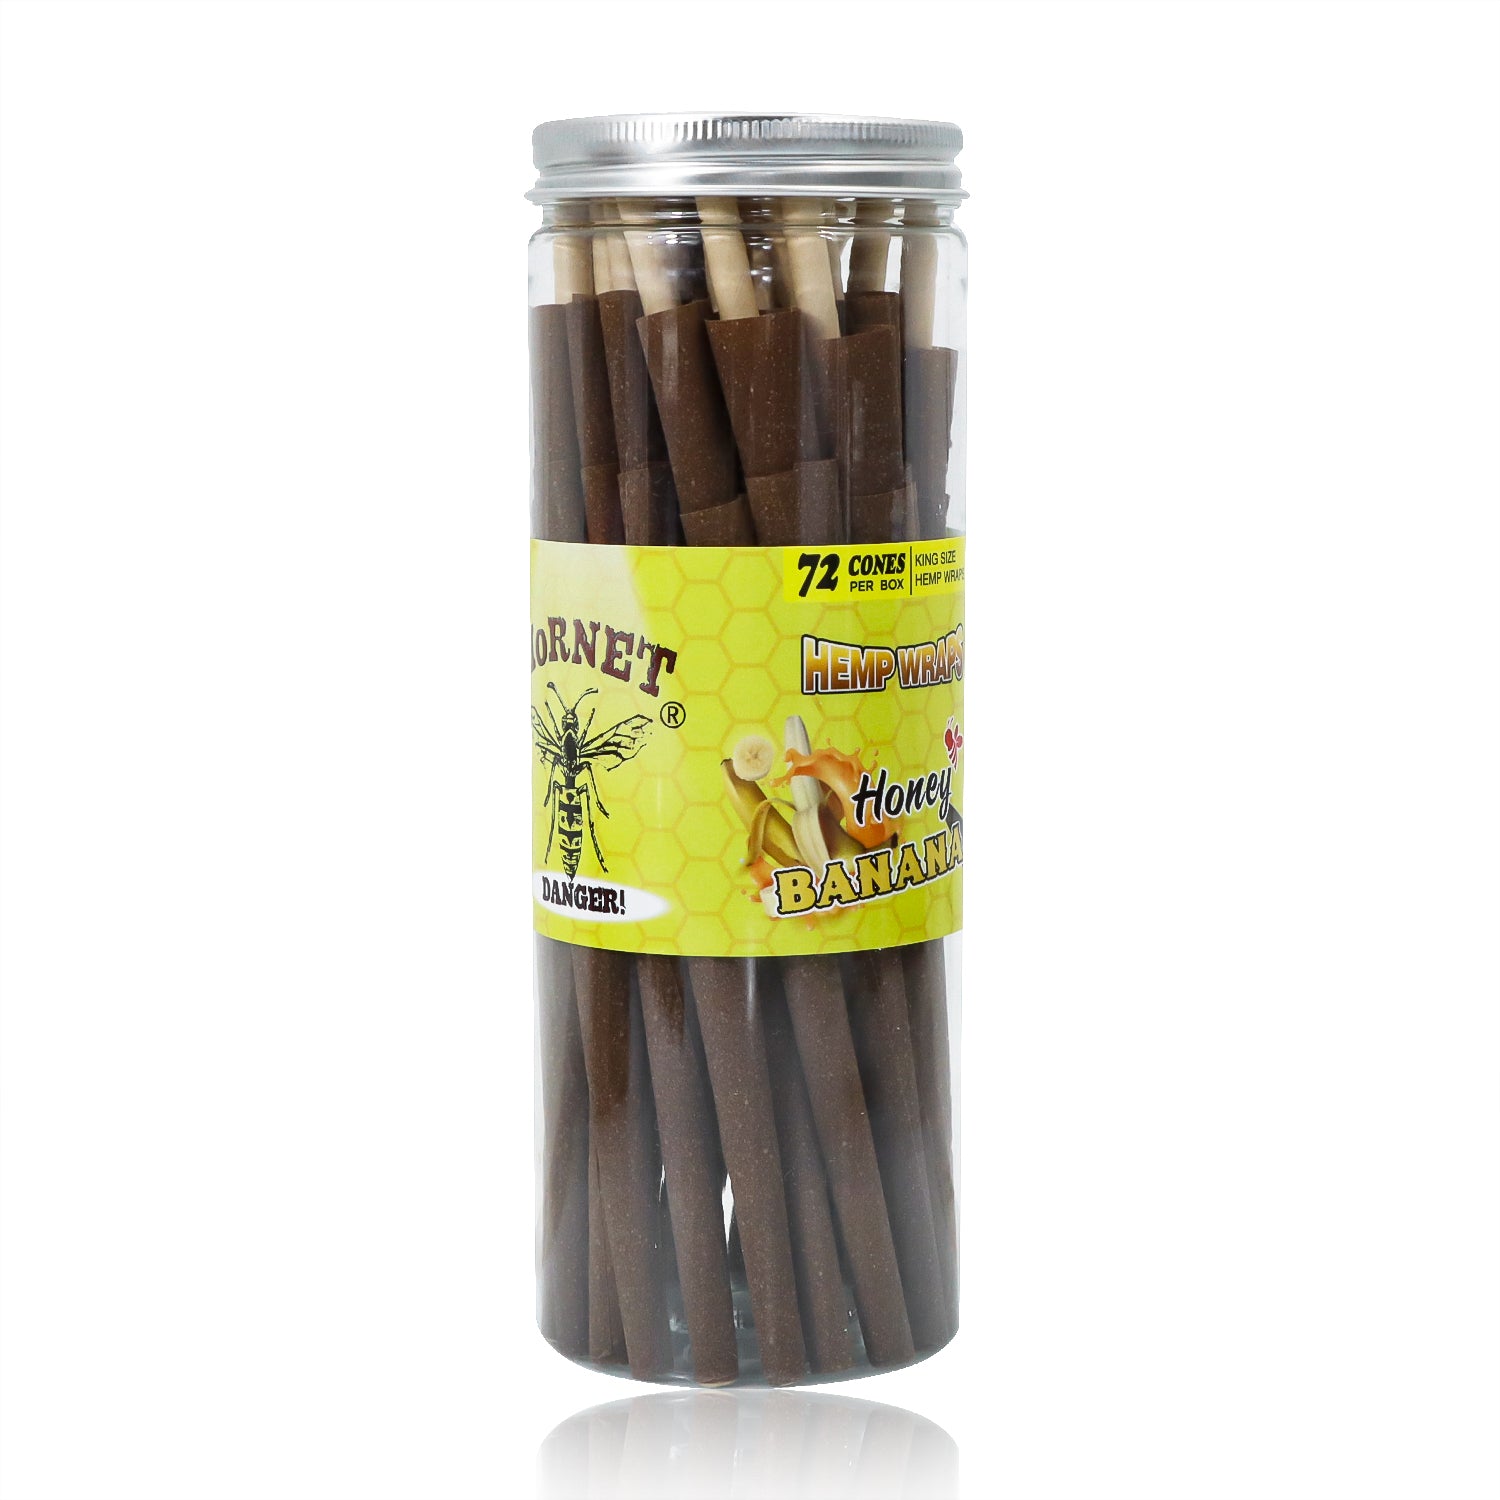 HORNET Banana Flavored Brown Pre Rolled Cones, King Size Pre Rolled Rolling Paper with tips, Slow Burning Rolling Cones & load, 72 PCS / Jar